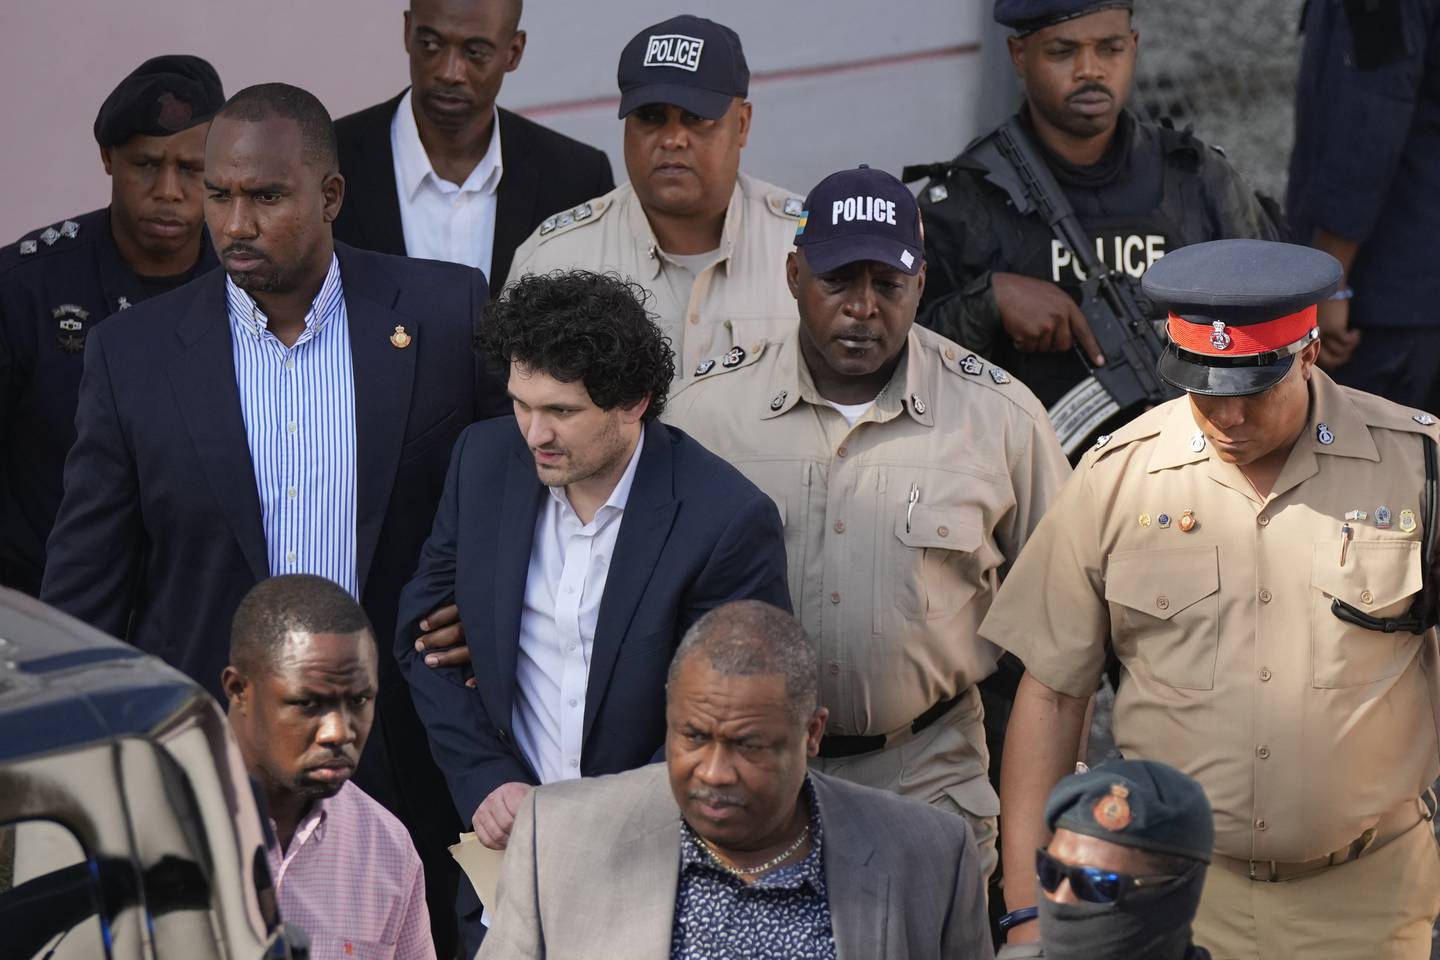 Sam Bankman-Fried, co-founder of the failed cryptocurrency exchange FTX, is escorted out of Magistrate Court after a hearing in Nassau, Bahamas, last month. AP